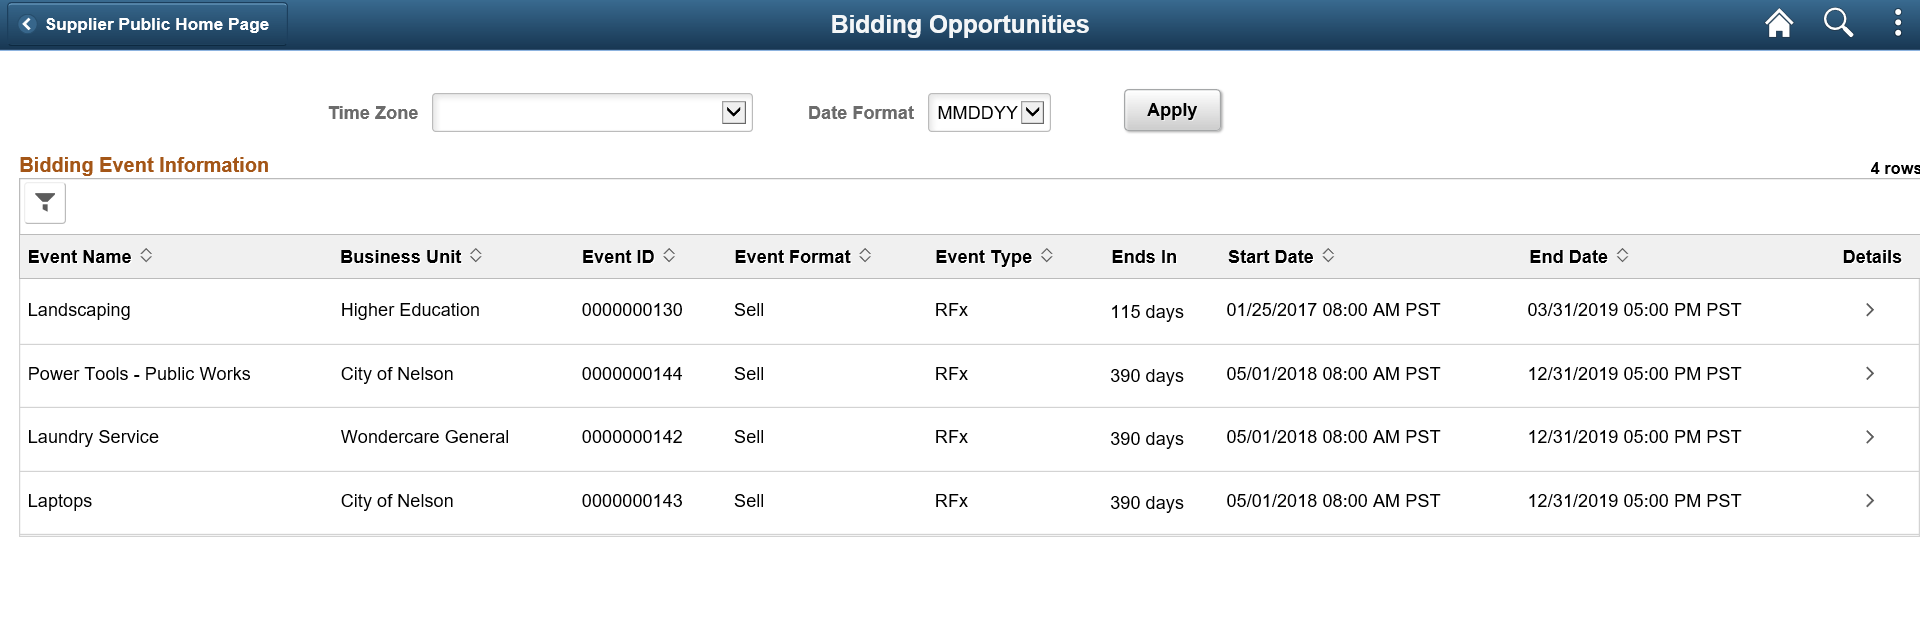 Bidding Opportunities page